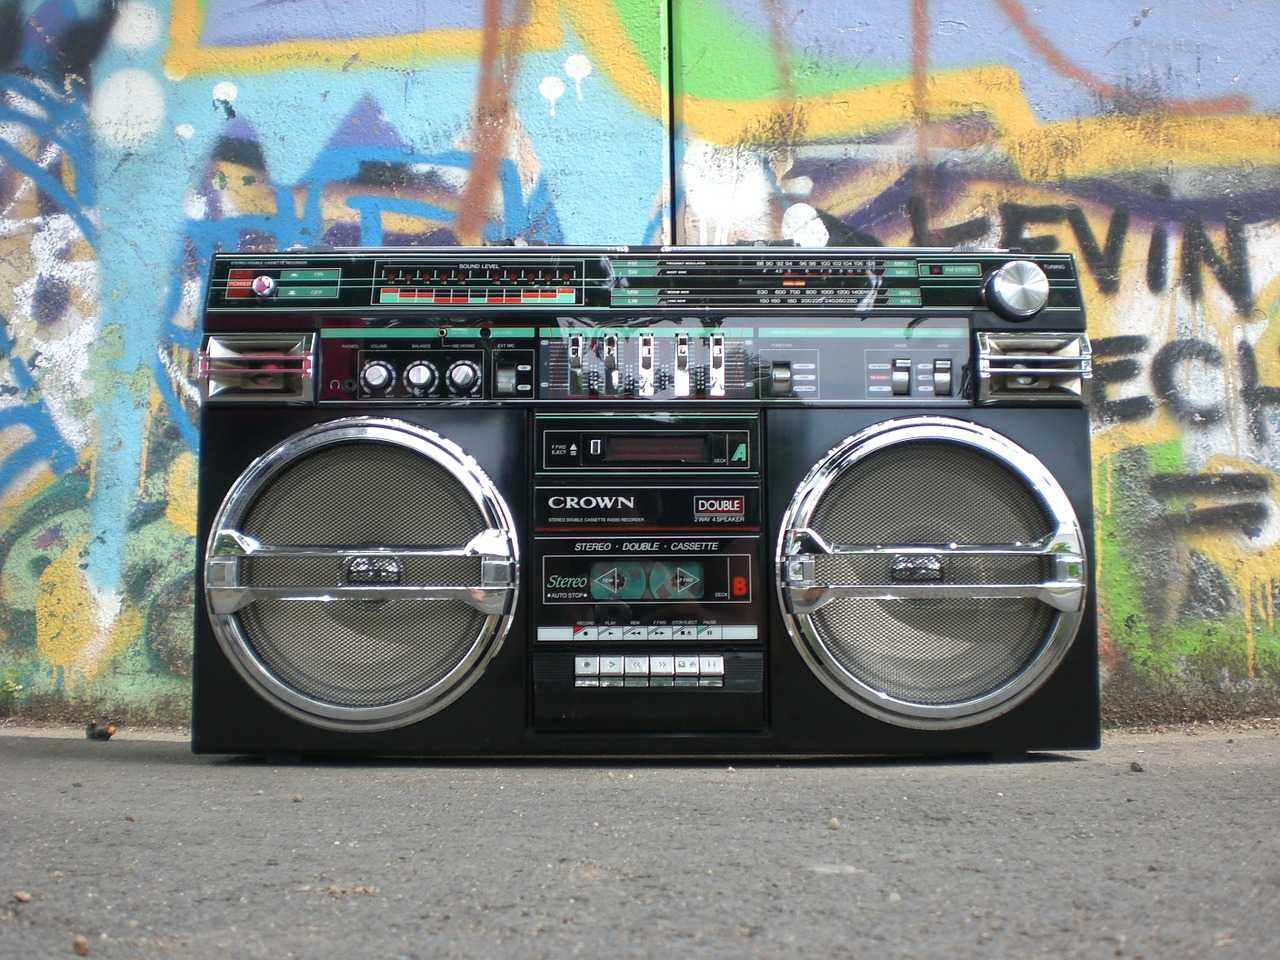 Top 5 best boombox CD players to buy in 2020